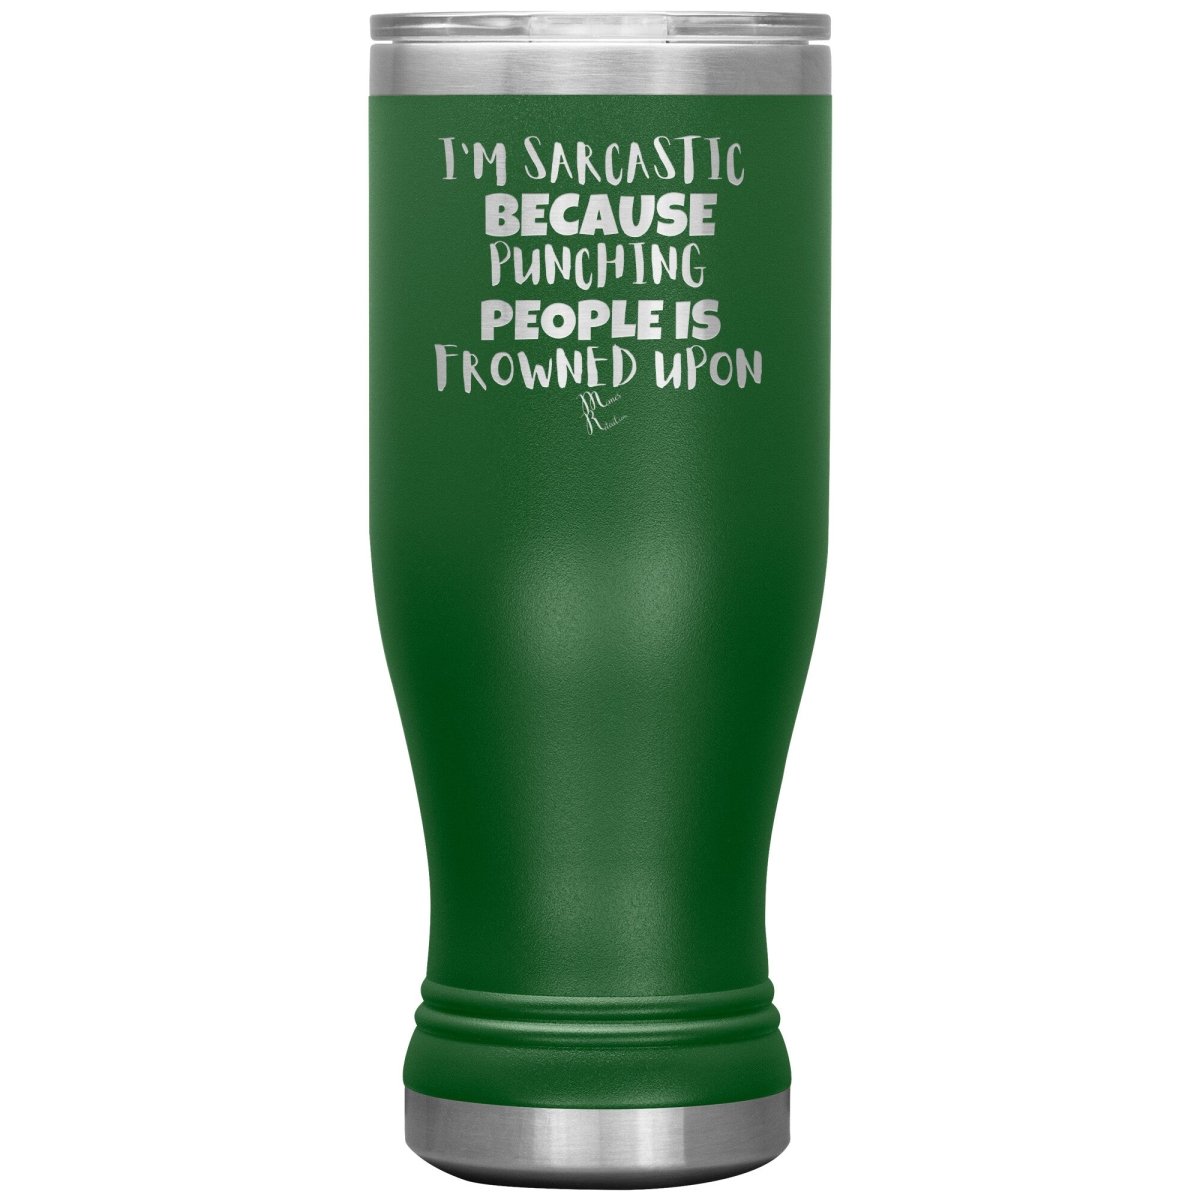 I'm Sarcastic Because Punching People is Frowned Upon Tumblers, 20oz BOHO Insulated Tumbler / Green - MemesRetail.com